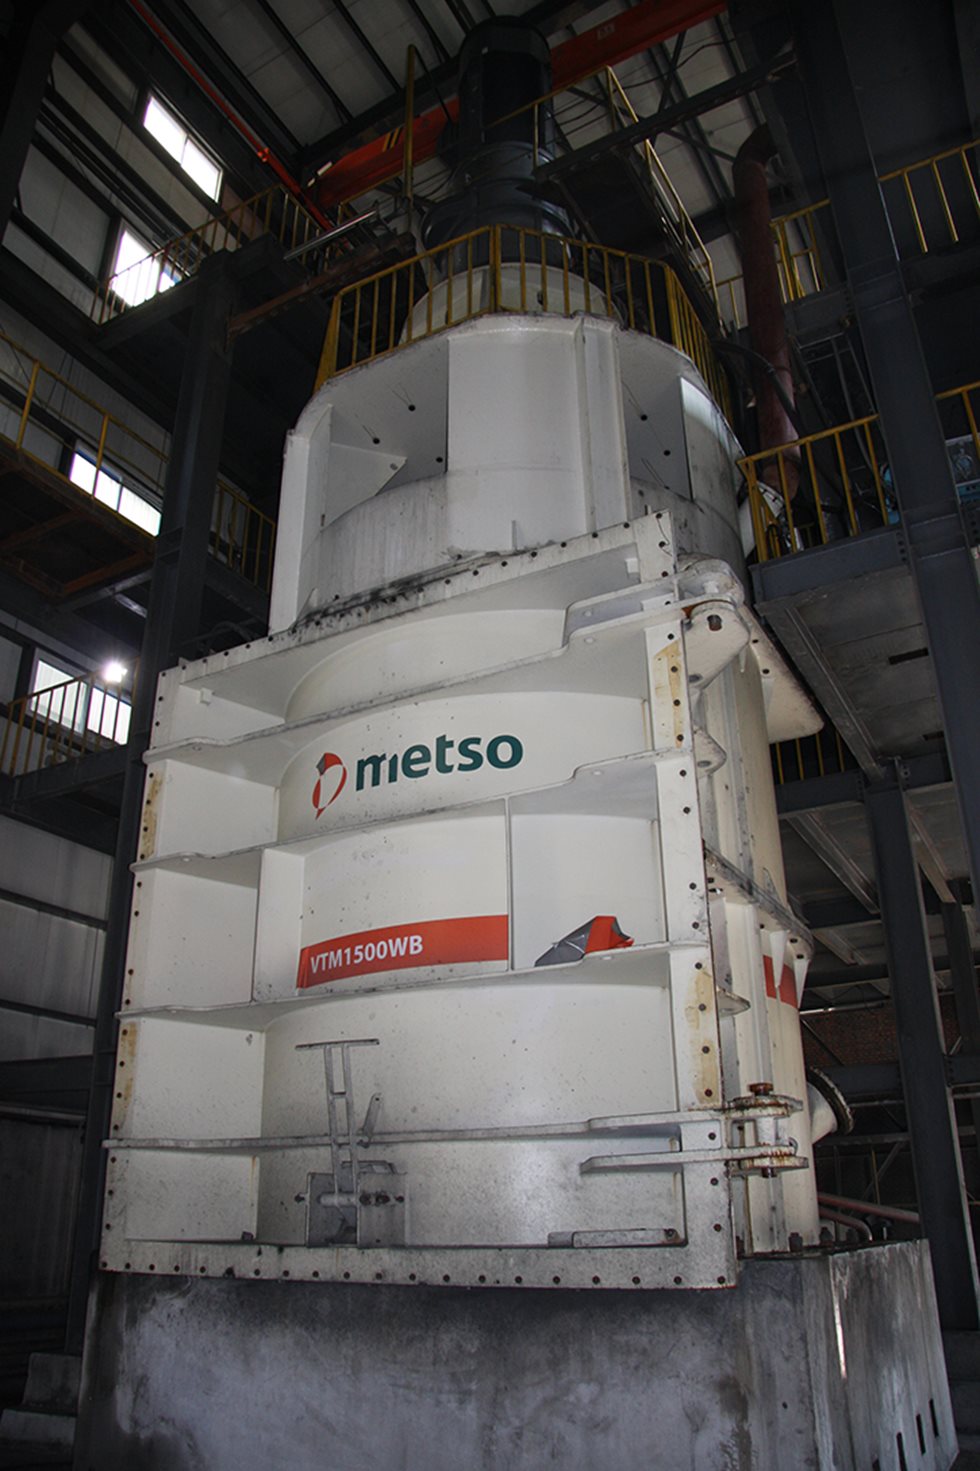 Vertimill 500 installed at Miaogou mine site. 